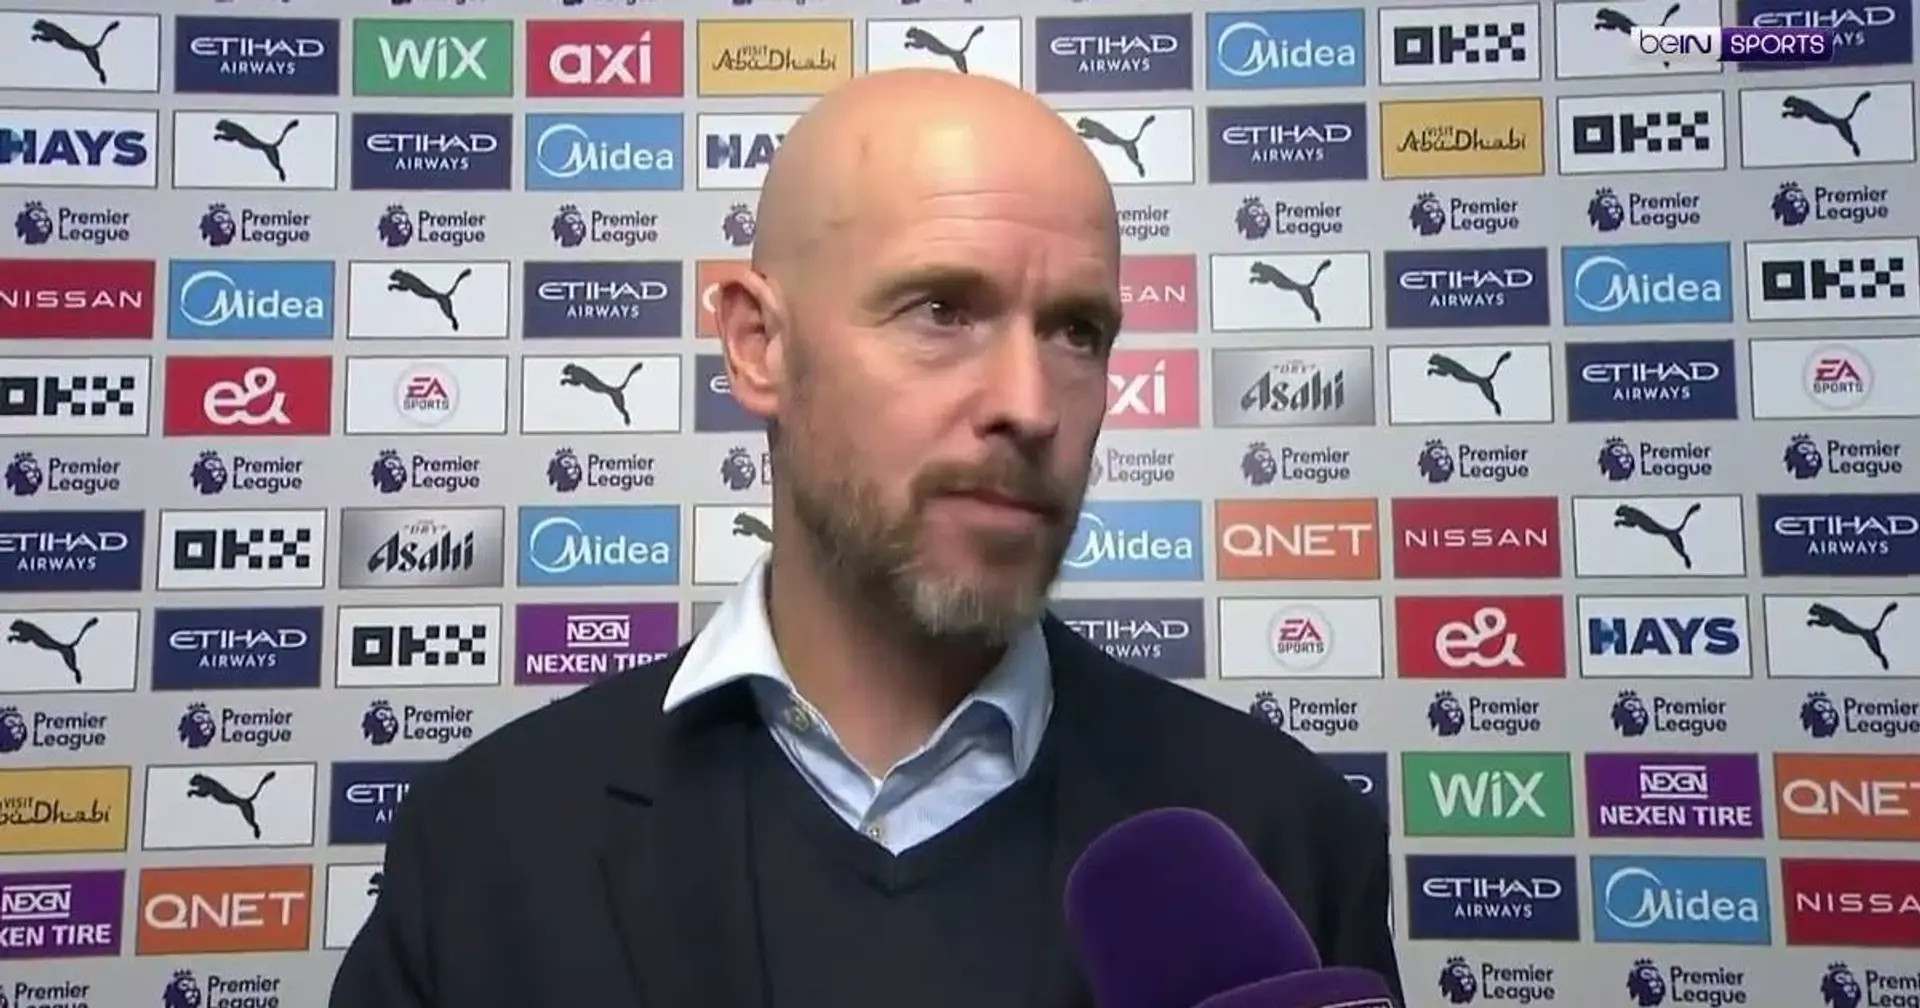 'I think the plan went well': Ten Hag insists Man United lost to fine margins vs Man City